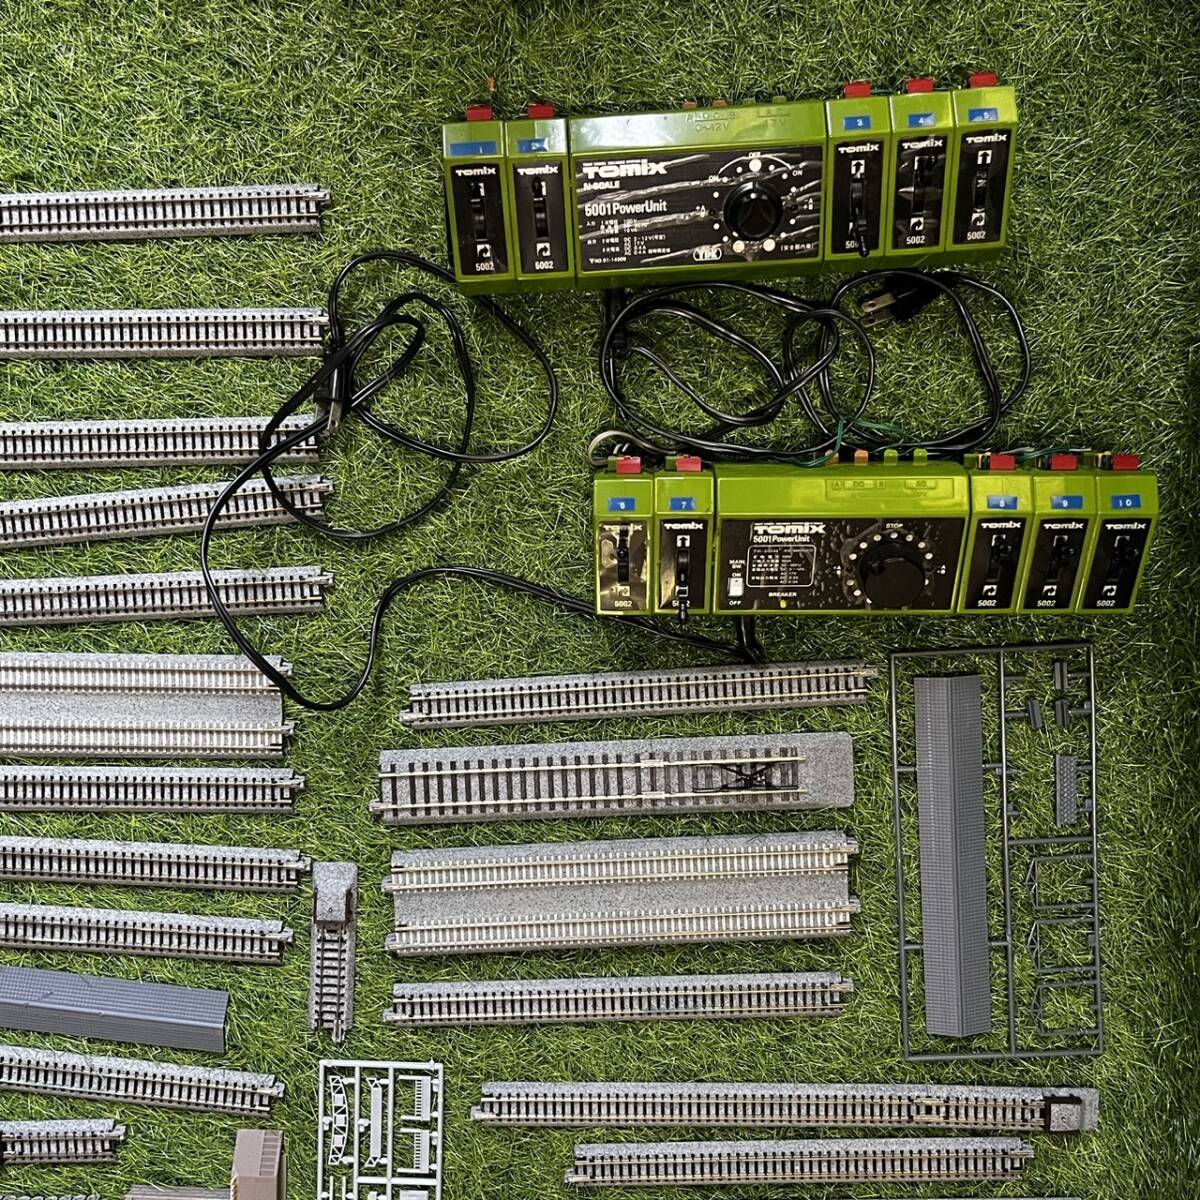  new goods unused contains KATO TOMIX N gauge rail car cease roadbed direct line roadbed station model DX power unit Point switch etc. large amount summarize set 